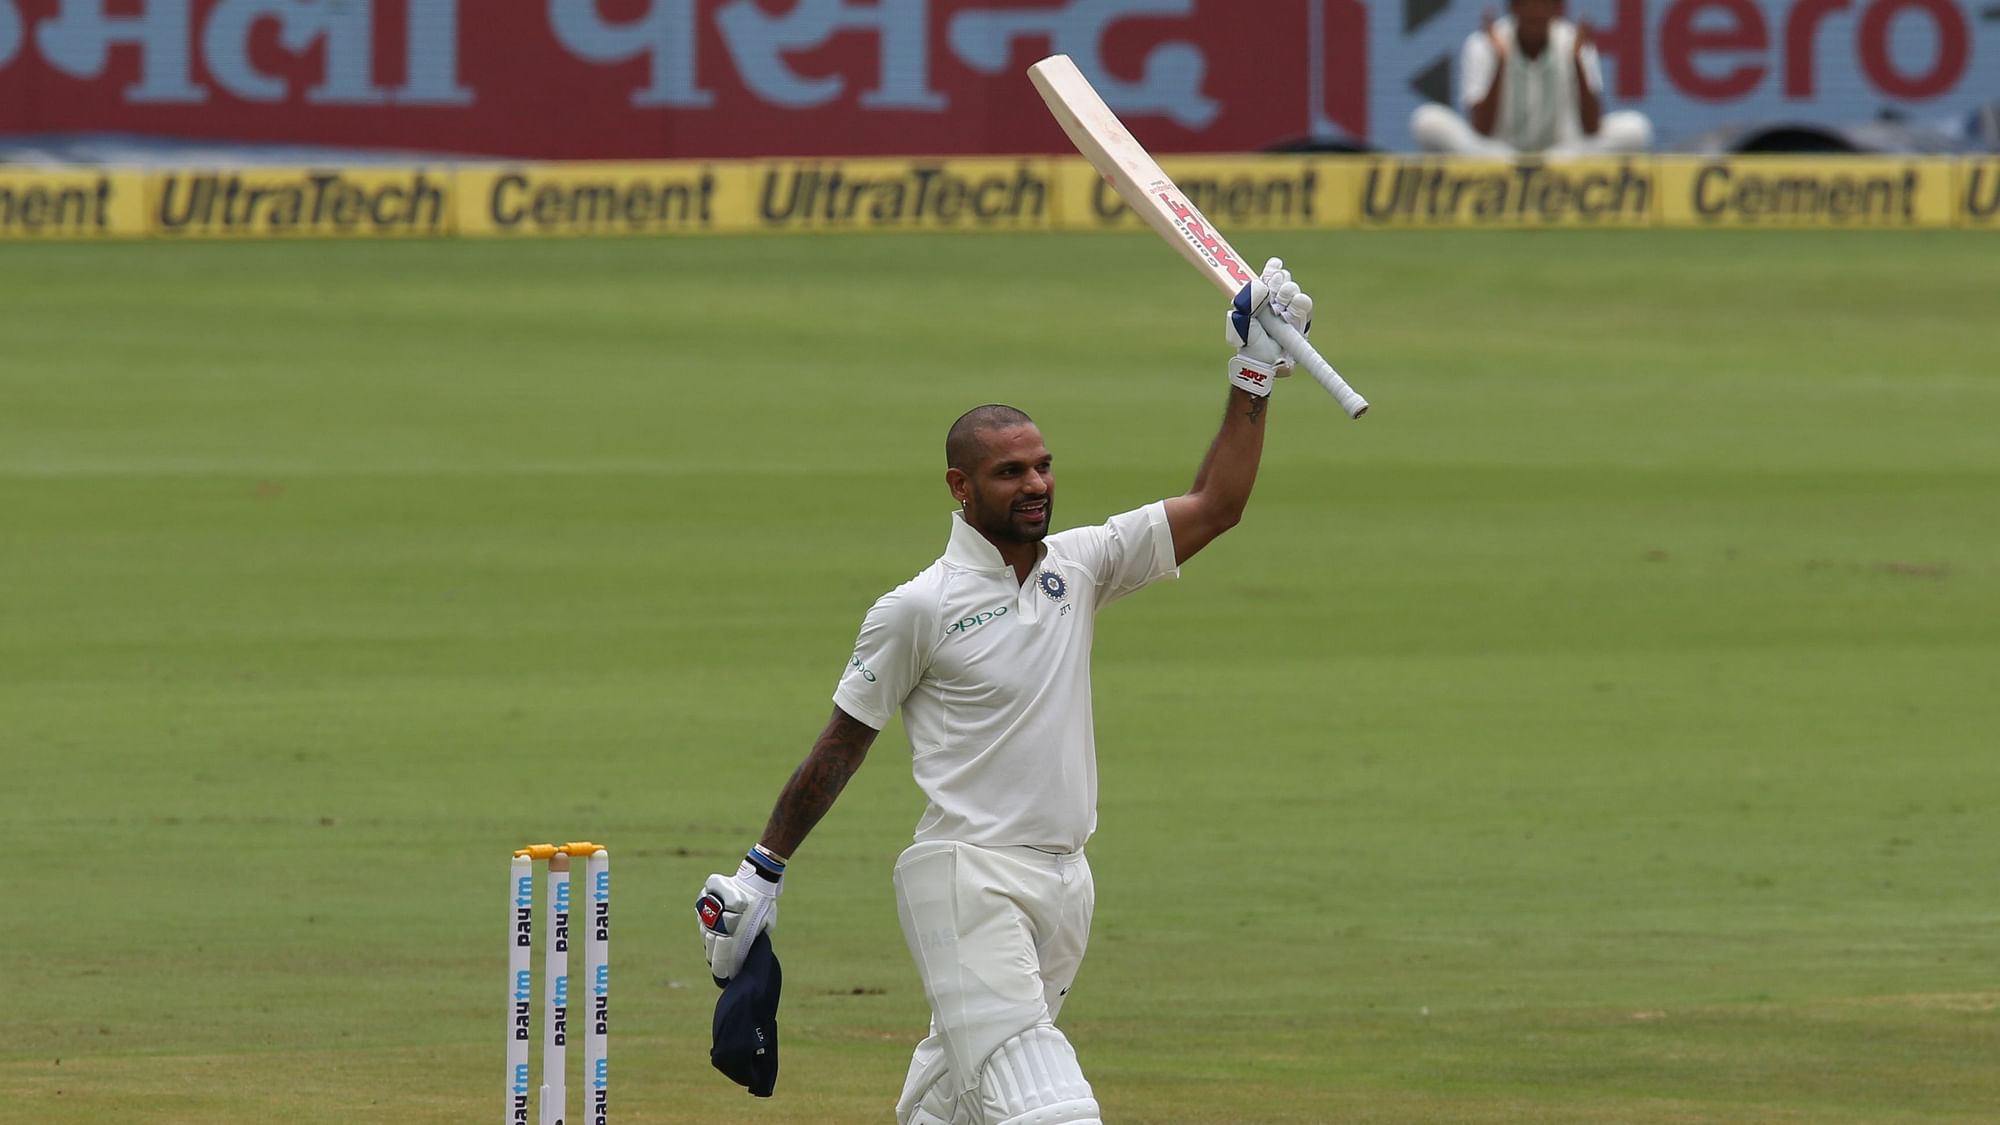 Shikhar Dhawan was on Monday named in squad for the upcoming T20I series against Sri Lanka.